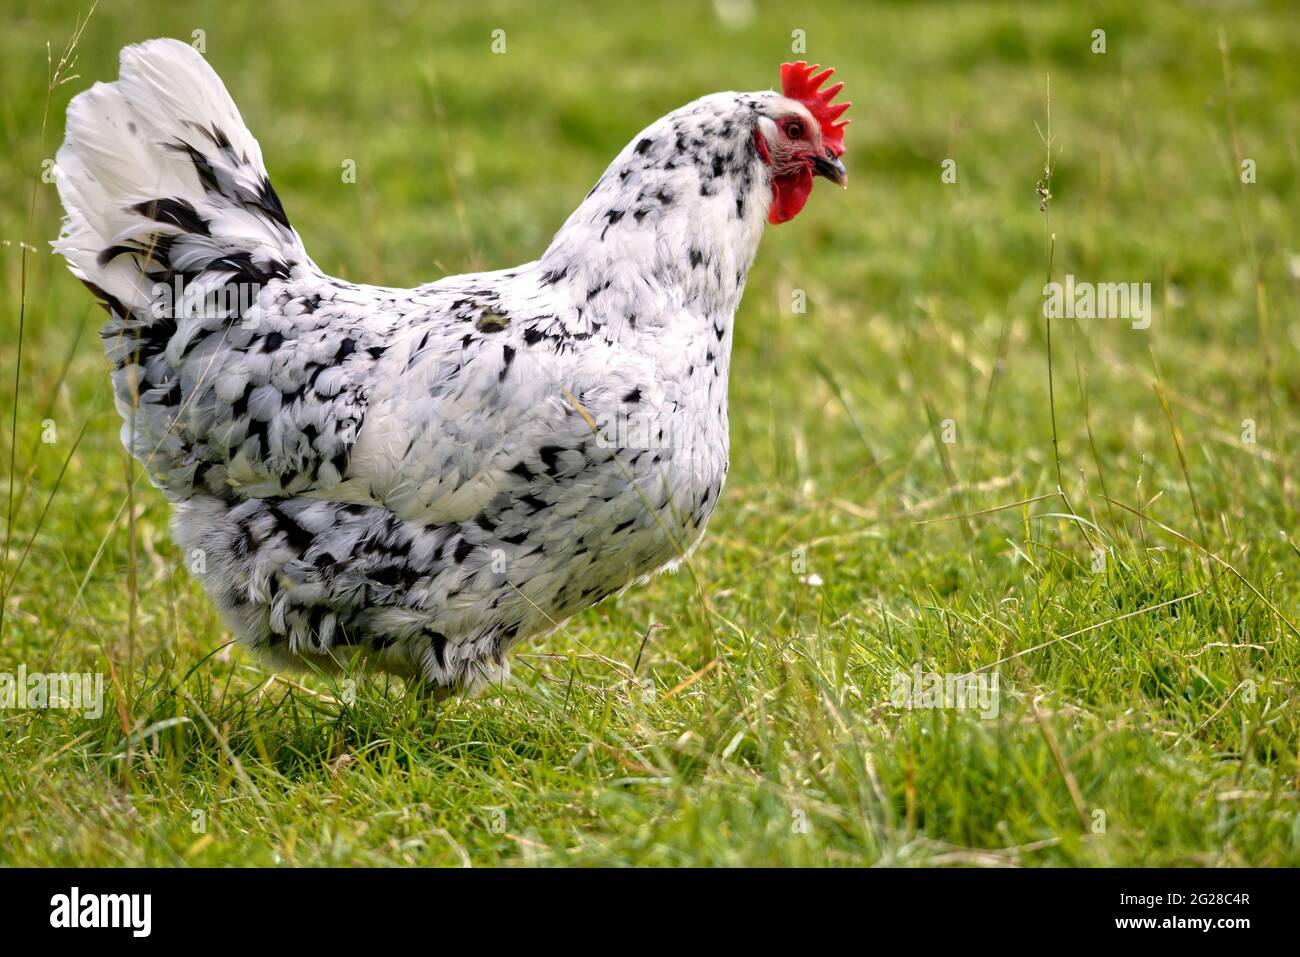 Black and white hen (Gallus) standing on grass and viewed from profile Stock Photo